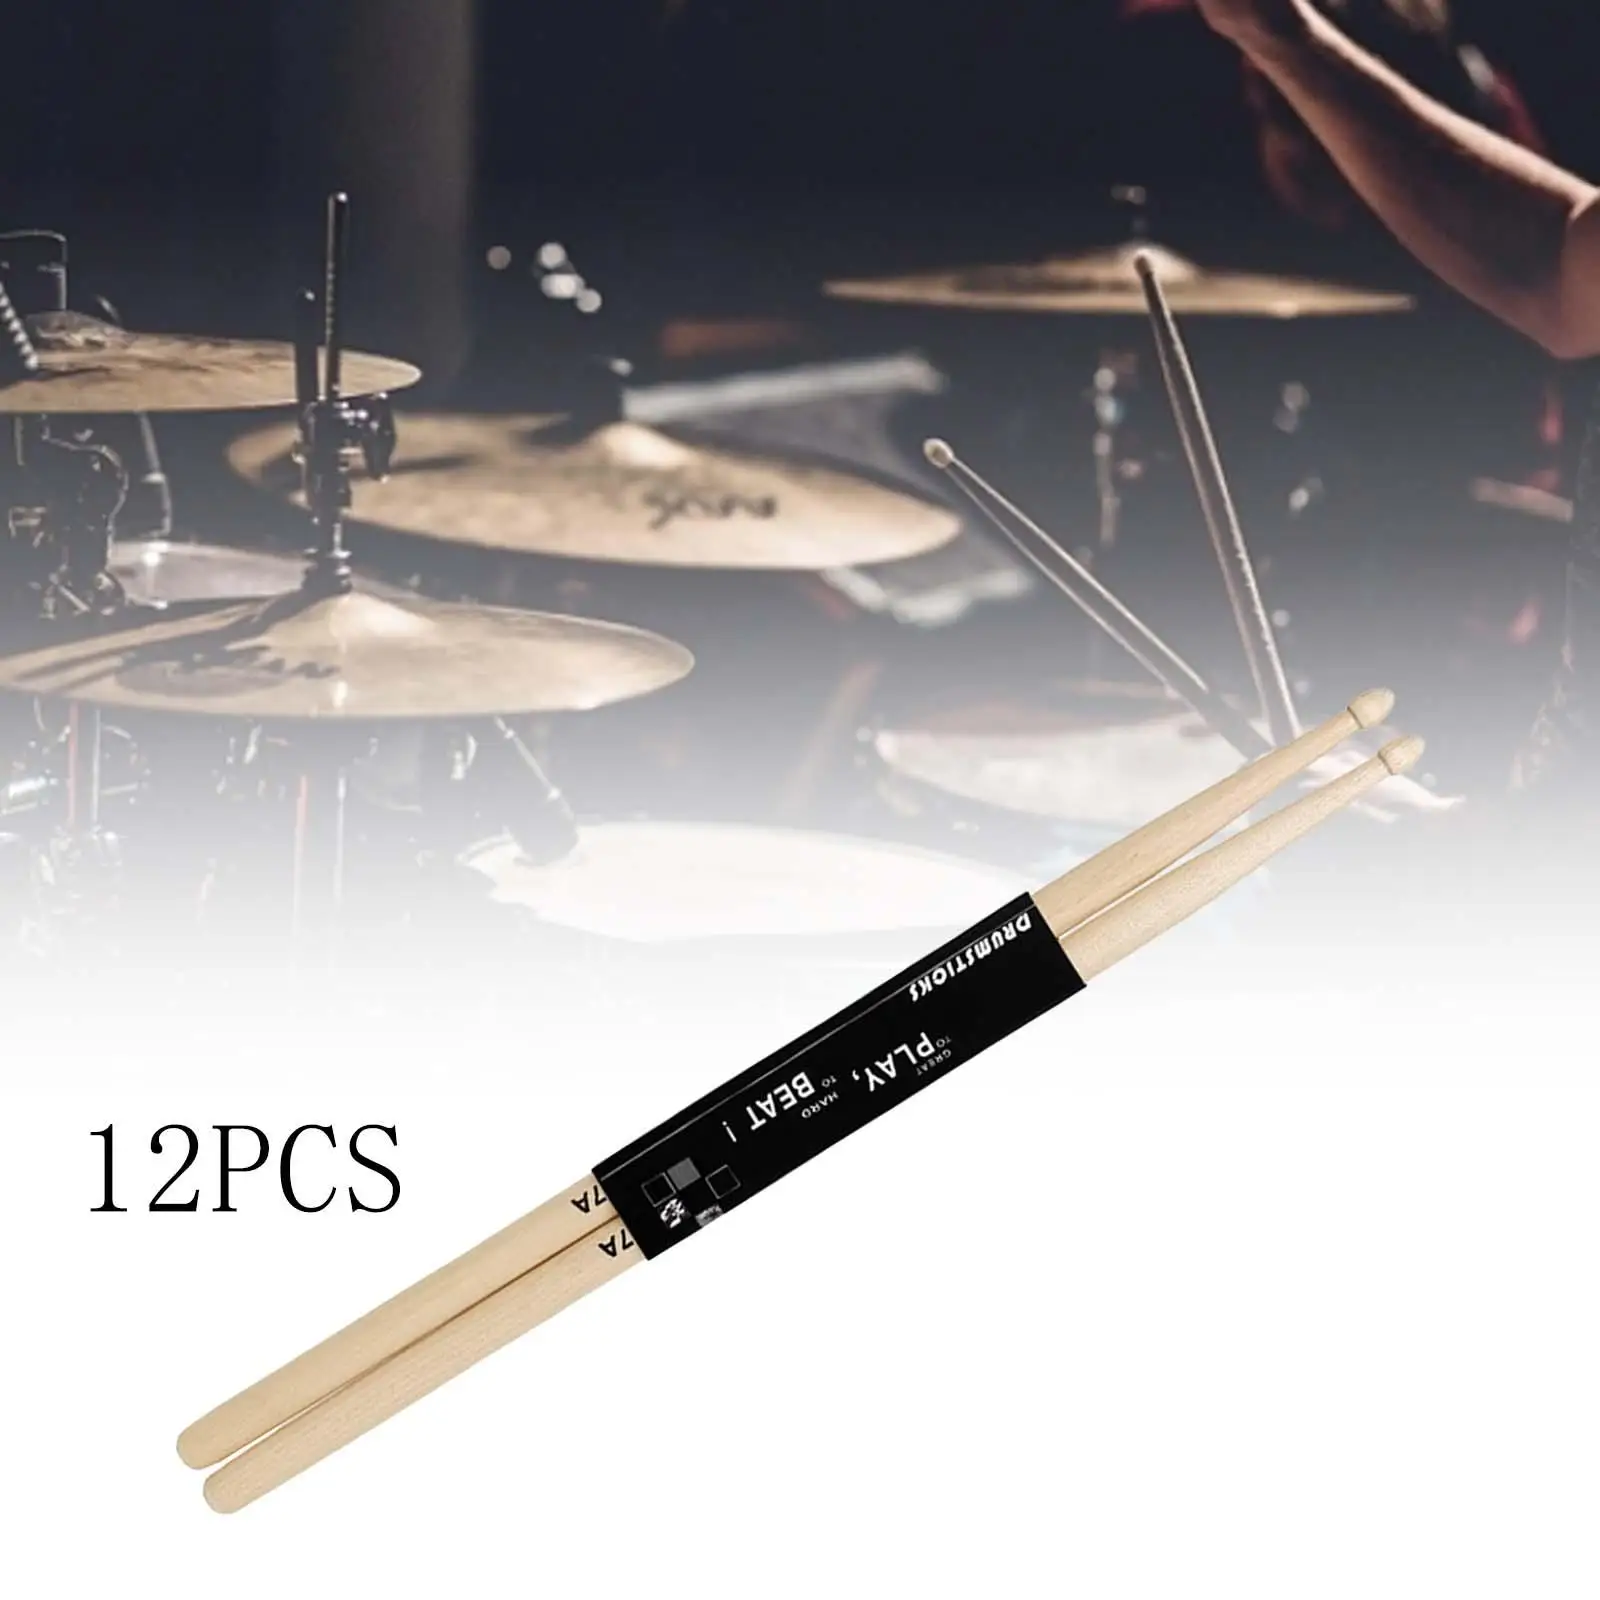 12 Pairs Classic Professional Wooden Drumstick for Children Beginners Kids